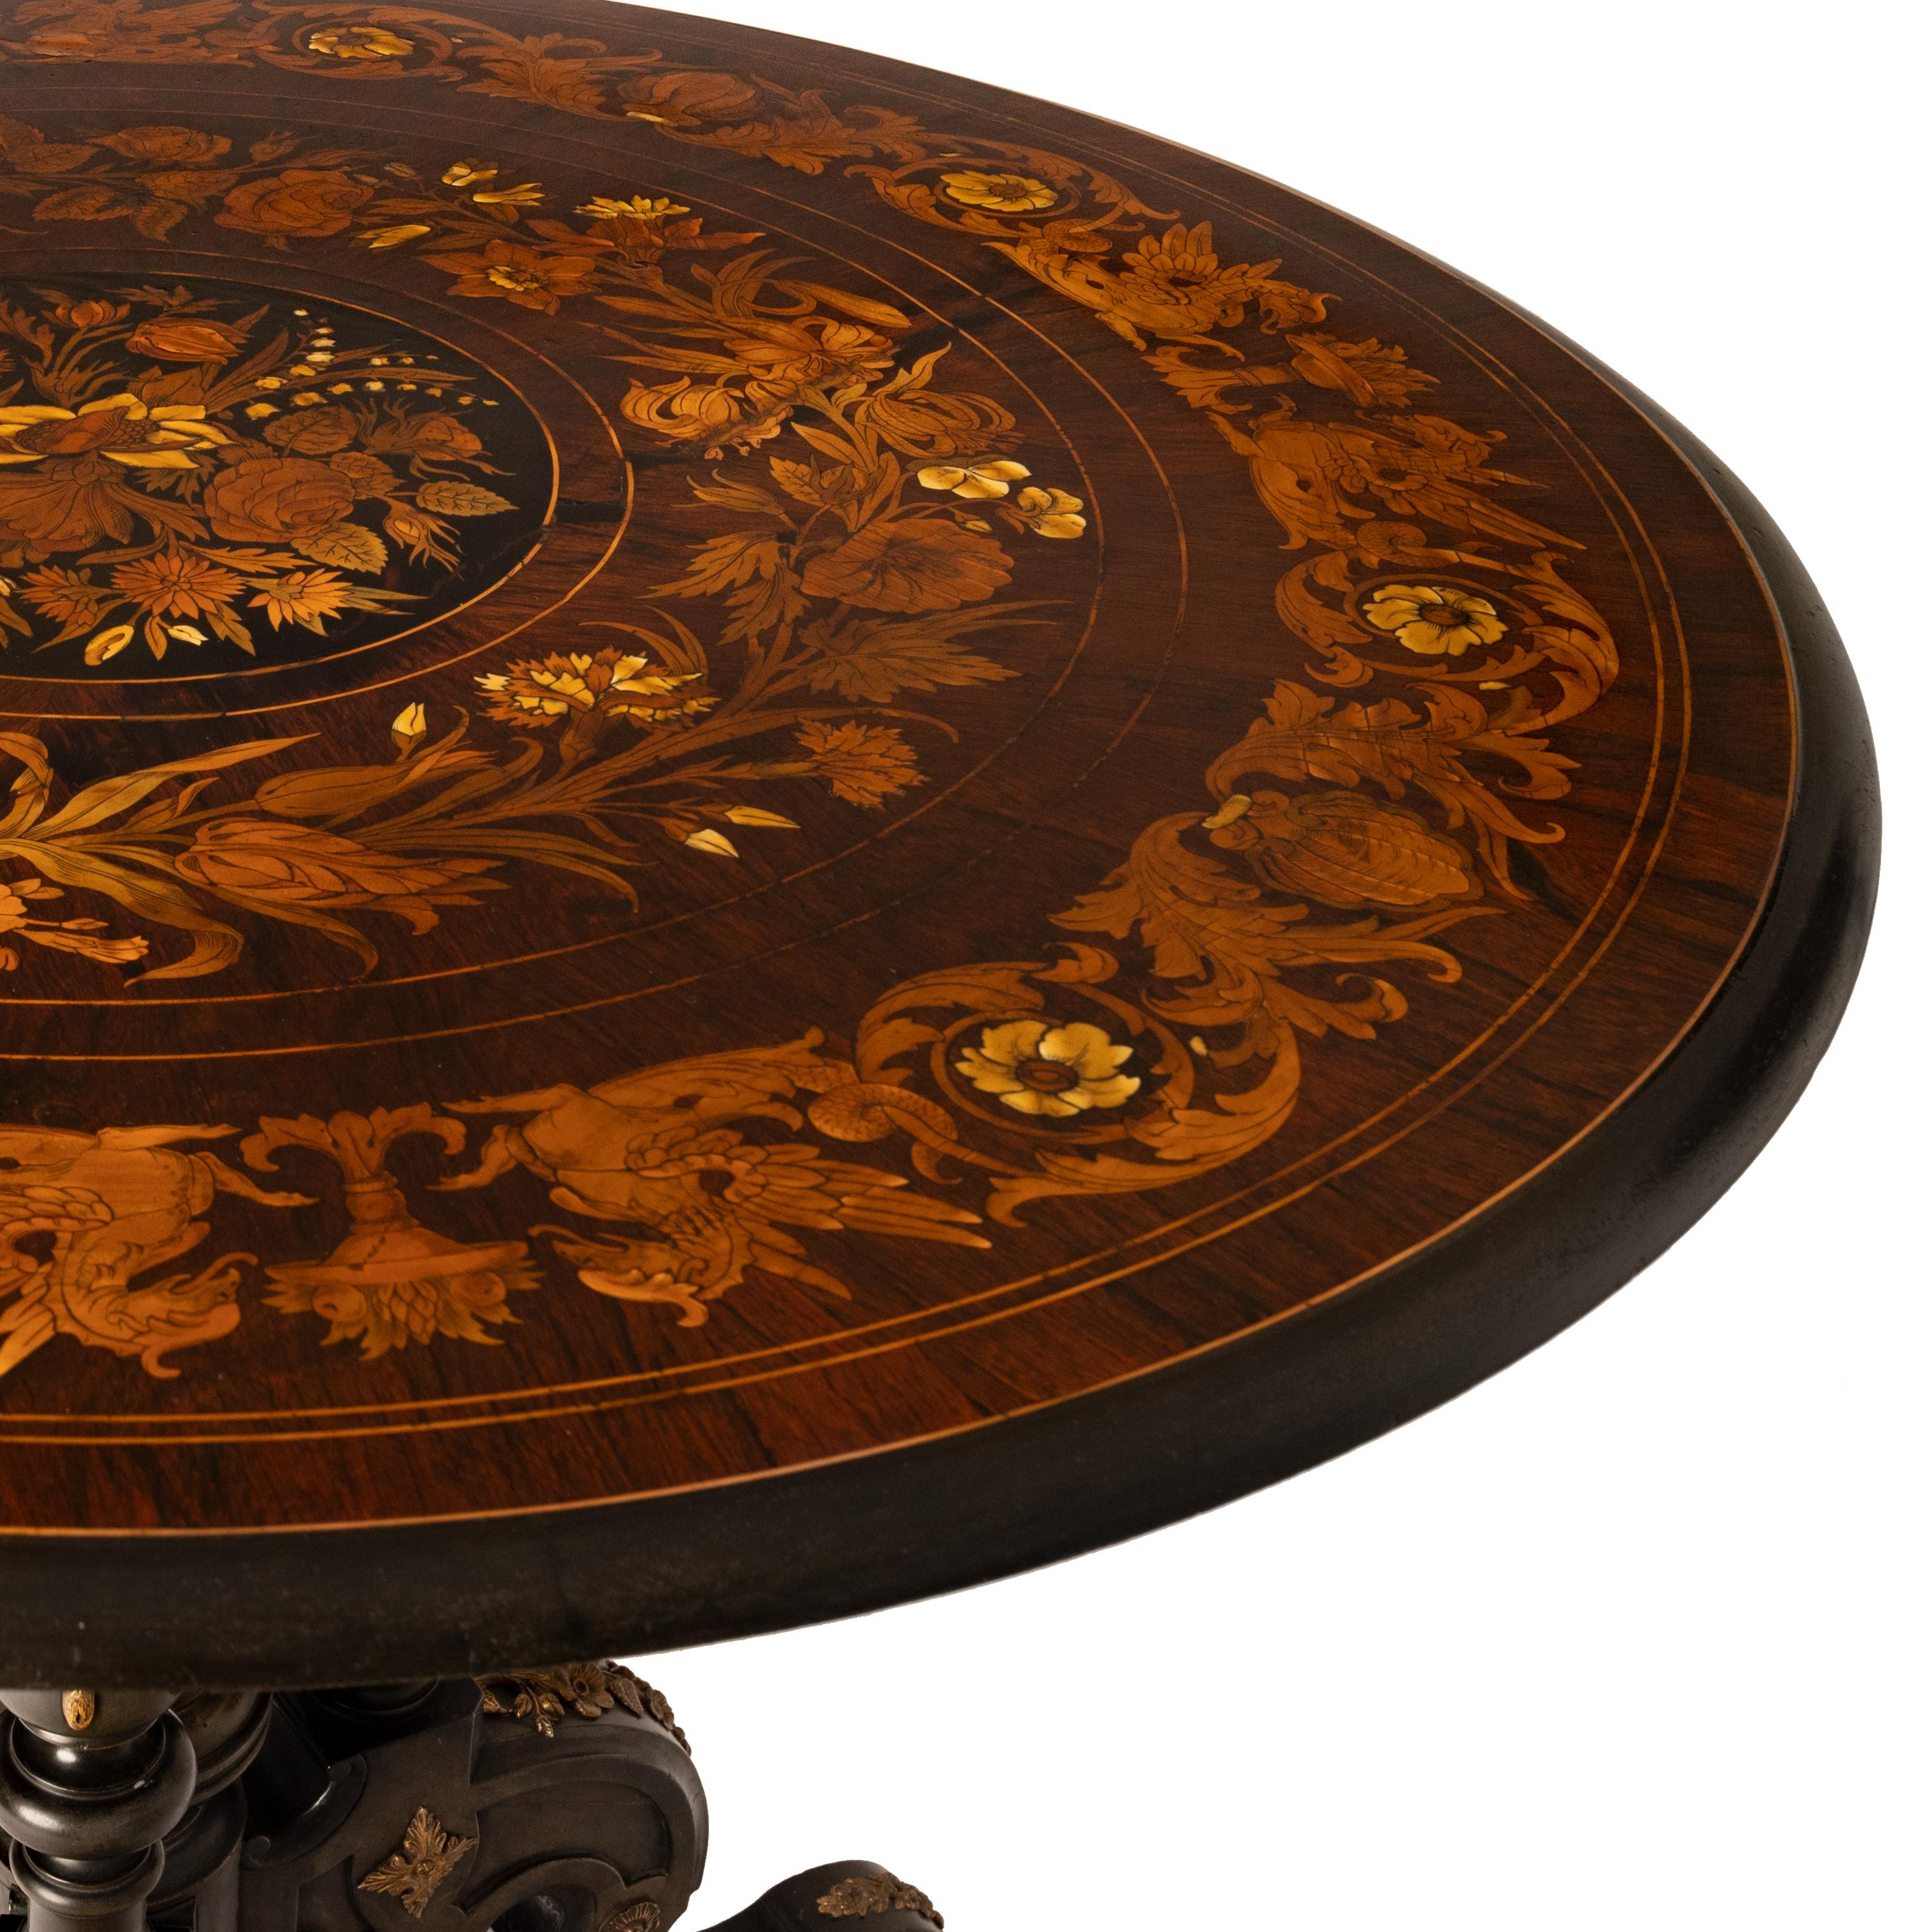 Antique French Specimen Wood Louis XV Marquetry Ormolu Round Tilt-Top Table 1870 For Sale 7